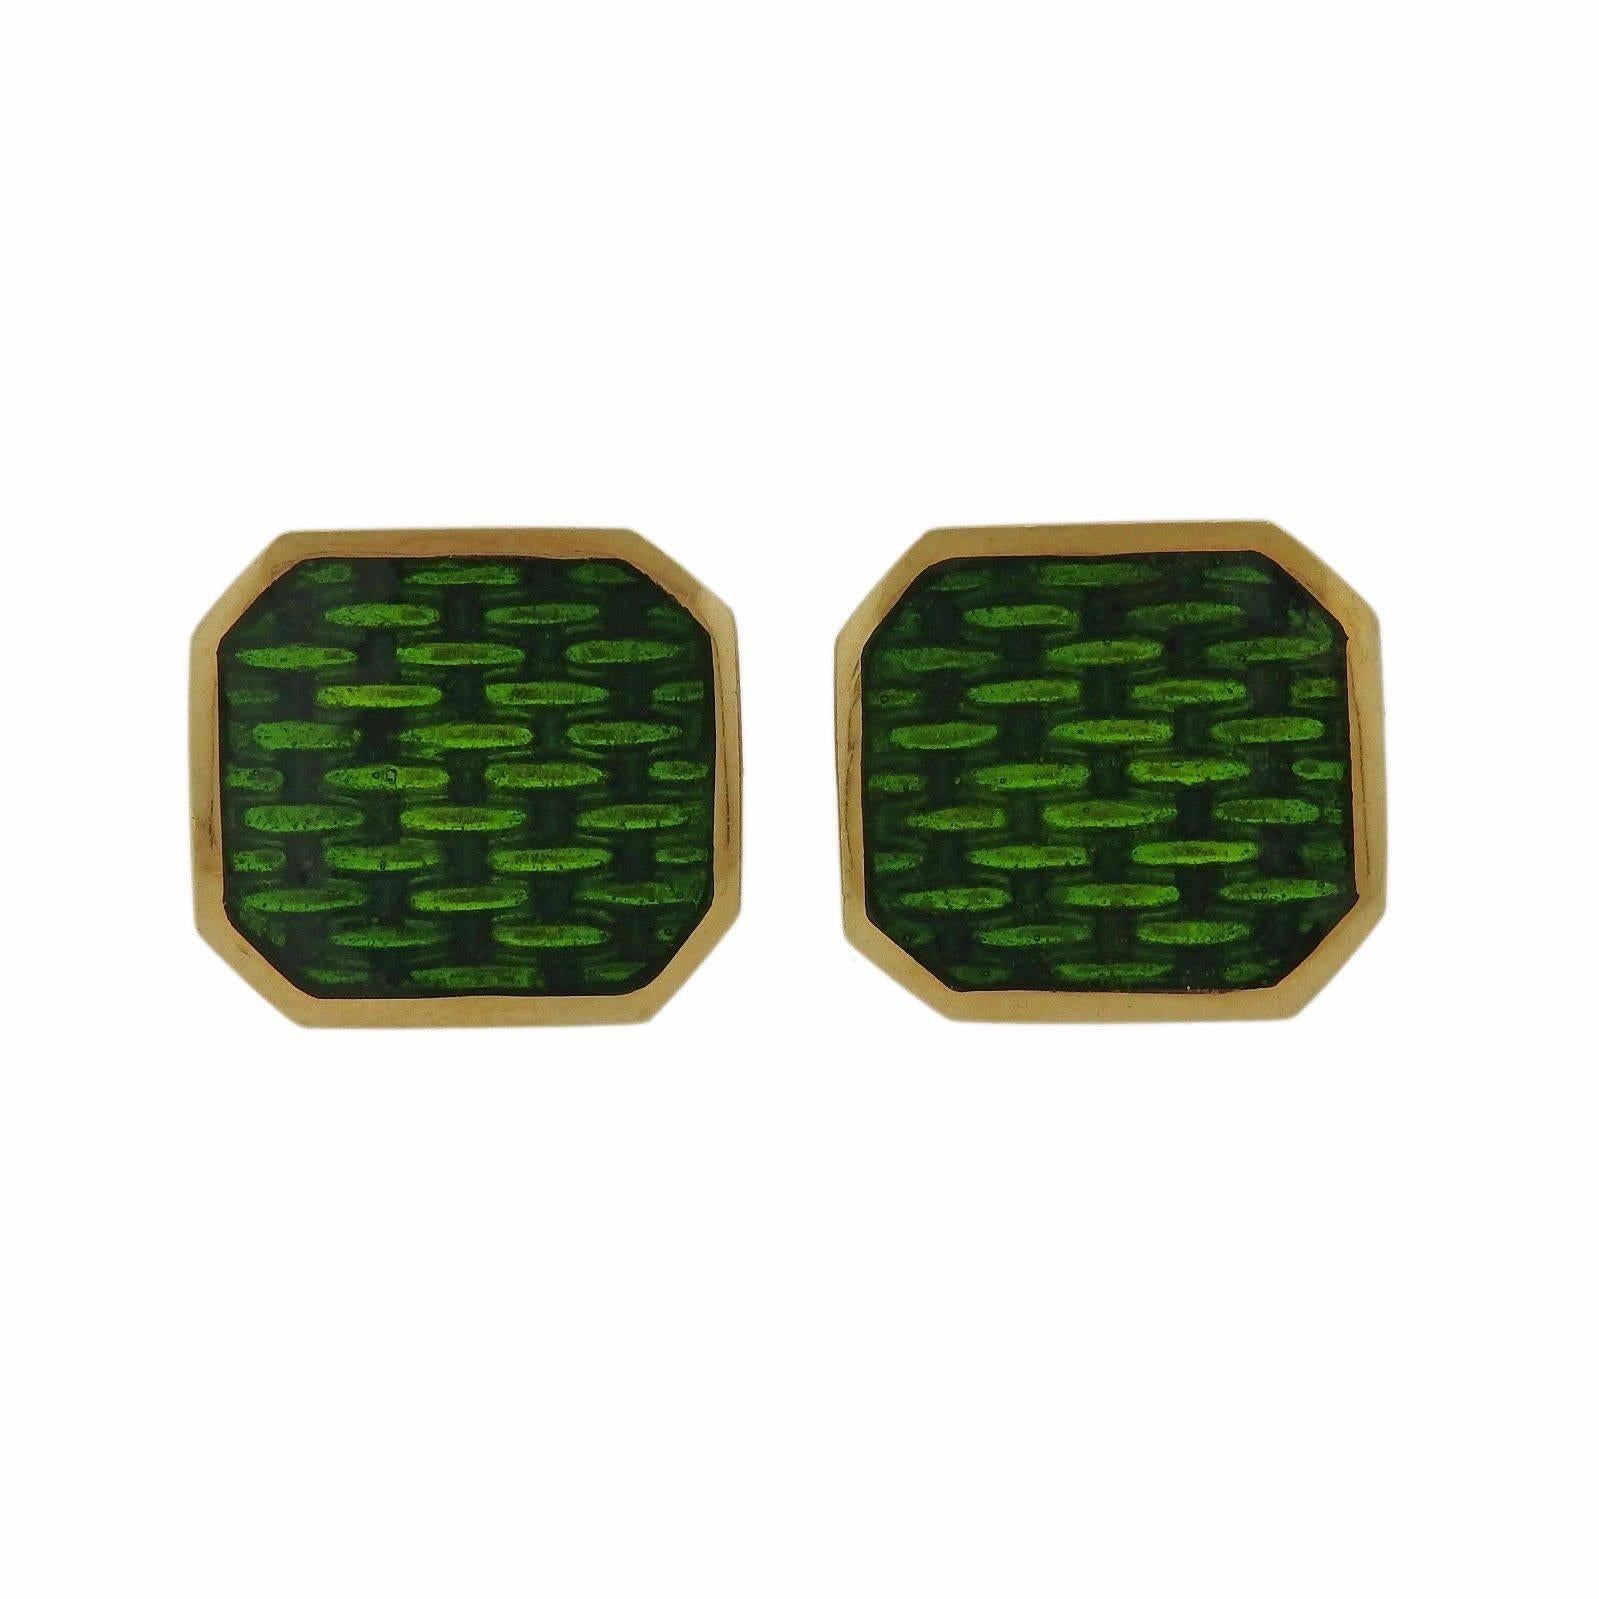 A pair of 18k yellow gold cufflinks adorned with green enamel.  The cufflinks measure15mm x 14mm and weigh 15.8 grams.  Marked: 18k.